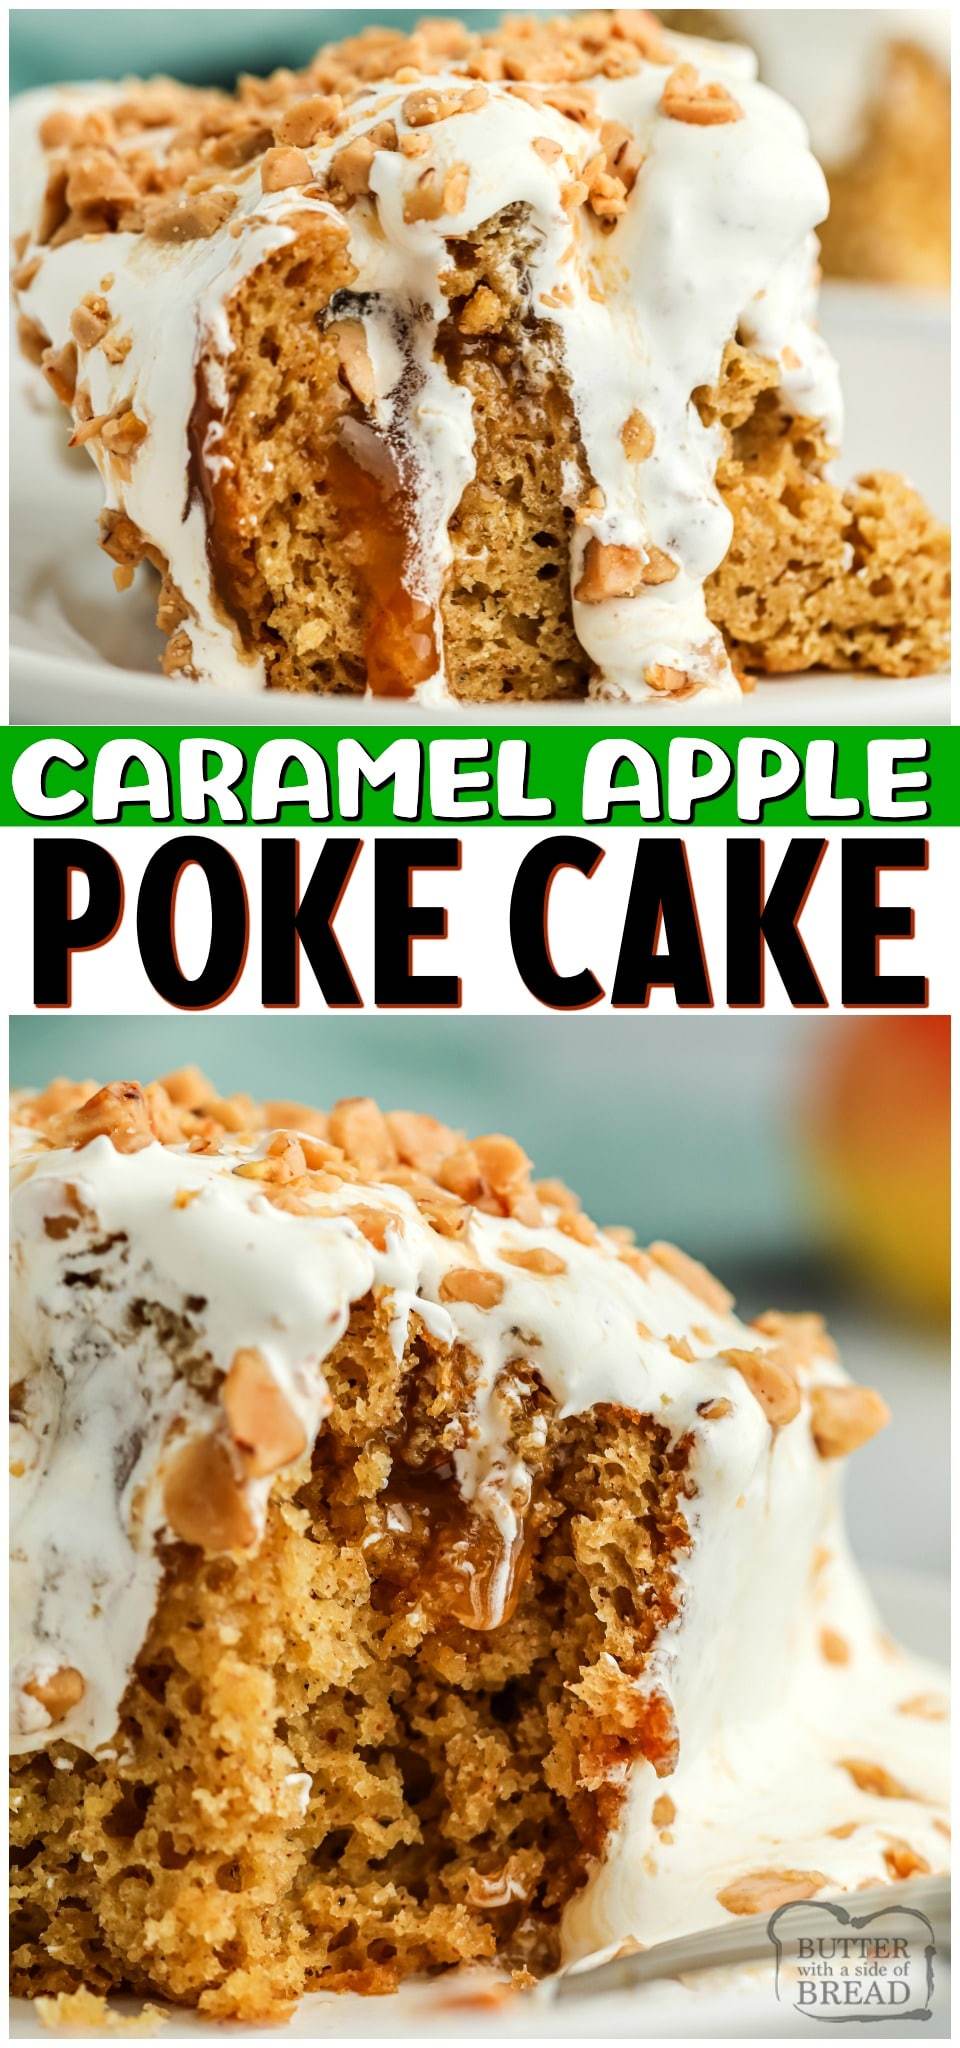 Caramel Apple Poke Cake made with spiced cake mix, applesauce and topped with caramel, sweet cream & toffee! Perfect poke cake recipe for Fall! #cake #caramel #apples #caramelapple #baking #pokecake #recipe from BUTTER WITH A SIDE OF BREAD